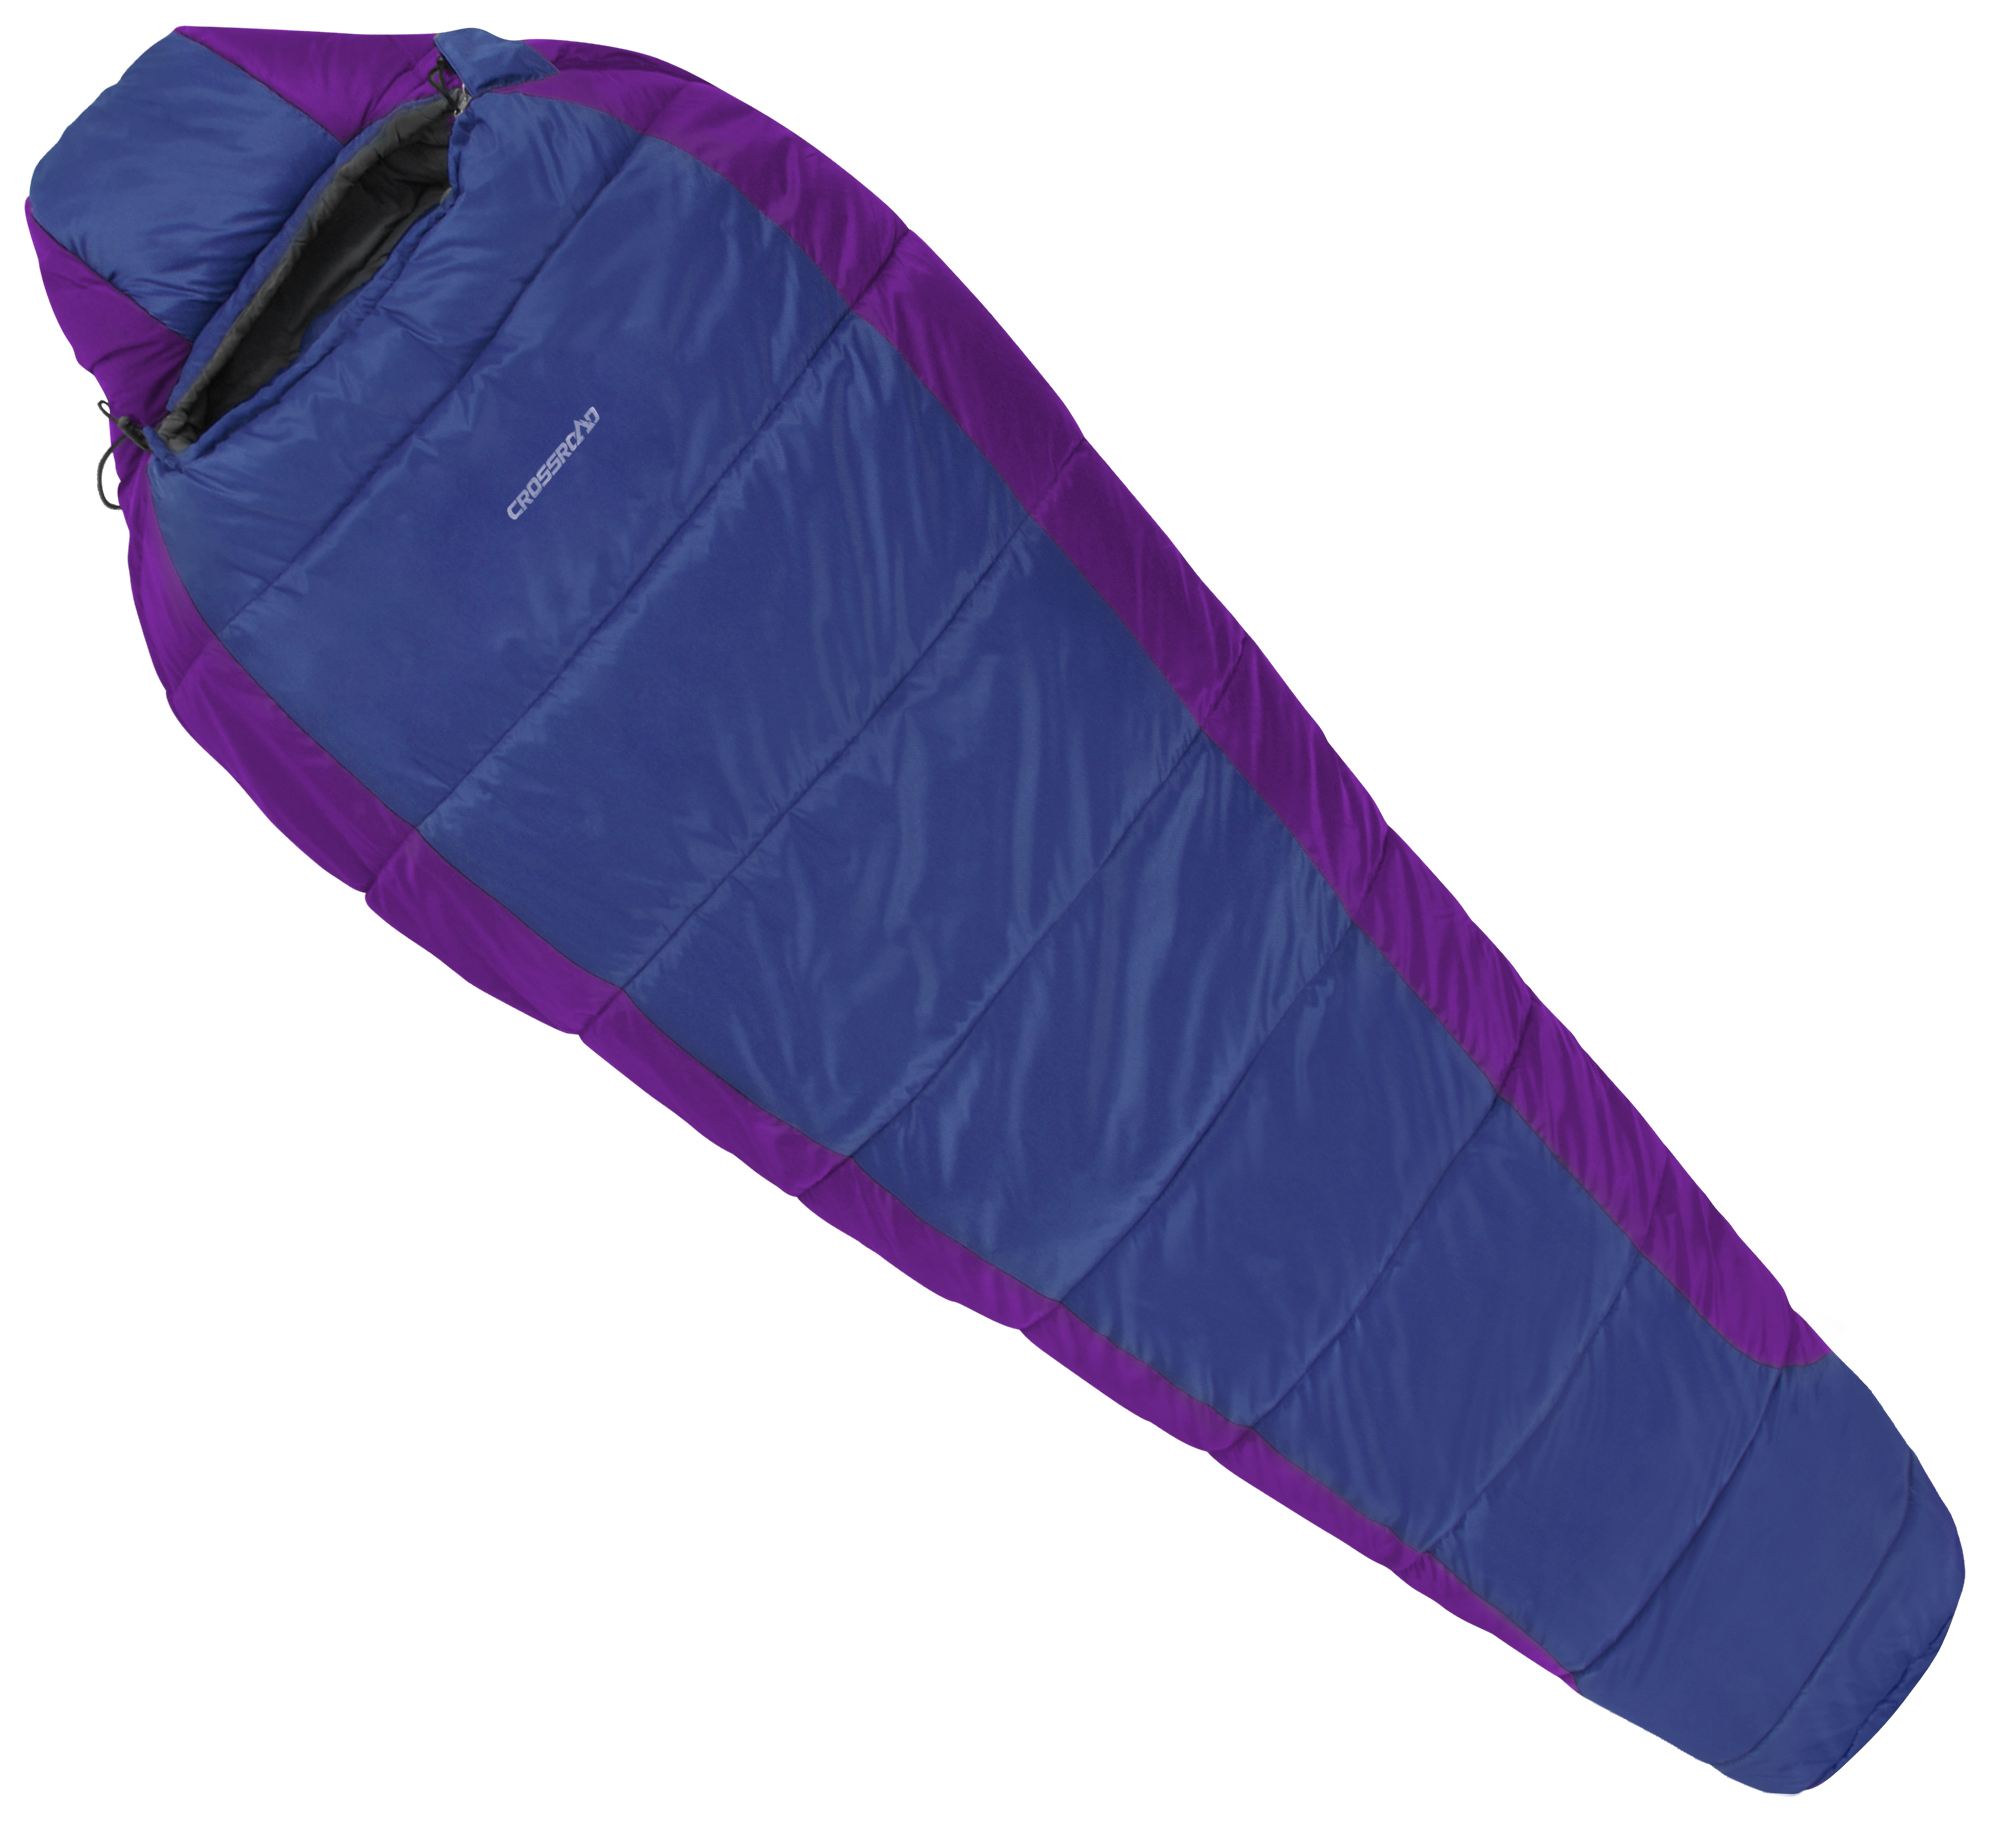 Sleeping bag with synthetic filling